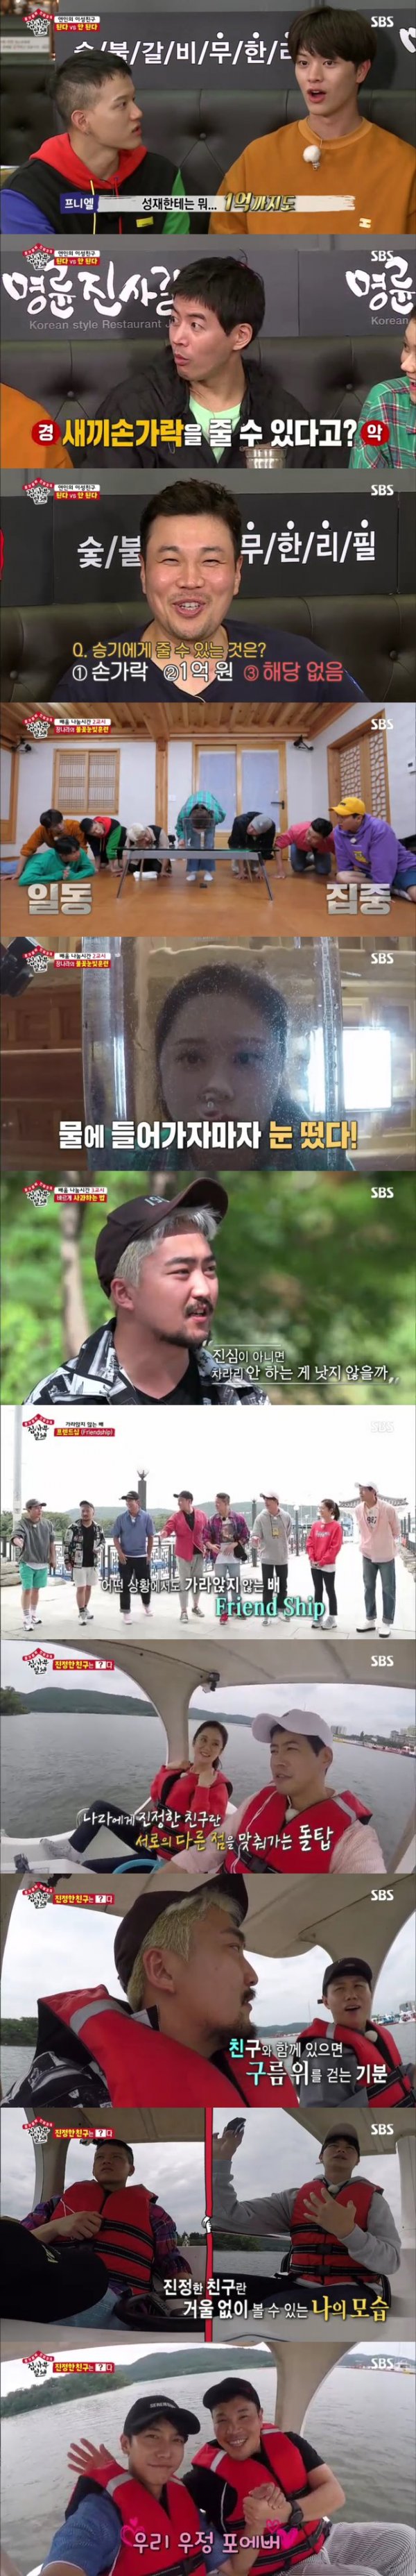 SBS All The Butlers traveled with Friends and looked back on the meaning of true Friend.According to Nielsen Korea, SBS All The Butlers furniture TV viewer ratings, which was broadcast on the 29th (Sun), recorded 5.1% (hereinafter in the Seoul metropolitan area), and 2049 target TV viewer ratings, which were collected for young viewers aged 20 to 49, recorded 2.9%.The best TV viewer ratings per minute of the scene where Jang Na-ra was singing Sweet Dream rose to 5.9%, attracting attention.The broadcast was featured on the Friend Masters special feature last week, and Lee Sang-yoon, Yang Se-hyeong, Lee Seung-gi, and Yook Sungjae were shown to look back on the meaning of Friend with Jang Na-ra, Yoo Byung-jae, Shin Seung-Hwan and Peniel Shin.Members and Friends showed off their affection for each other at dinner.When asked, What can you give up for Yook Sungjae? Peniel Shin replied, I can give you up to 100 million. Lee Seung-gi said, No.I have to pay the gift tax, said Peniel Shin, who surprised everyone by adding, I can give you a little finger.Yoo Byung-jae also expressed an unexpected friendship for Yang Se-hyeong, saying, I can give you a long term.Finally, Shin Seung-Hwan asked what he could do for Lee Seung-gi, saying, I can not give 100 million for my family and I can not give my fingers.In addition, Jang Na-ra talked about his own acting know-how. Jang Na-ra said, I keep nervous and ready.I watched my seniors practice and then I followed them and studied. In the meantime, Jang Na-ra surprised everyone by showing an instant demonstration, saying, When you wash your eyes, you open your eyes while you are submerged in the water.Yoo Byung-jae suggested that he spend a day with Friends and write down his sorry feelings, saying, I will talk about how to apologize properly.The next morning, the members and friends read their respective apology.Since then, Yoo Byung-jae said, There is a forbidden word for the expression of apology. Unintentionally, unlike intention, I did not intend to do so.If youre not serious, I think youd rather not apologize, he said, adding that his apology for my comfort was a bigger mistake.I think the purpose of the apology is not forgiveness but reflection, said Yoo Byung-jae, adding, Whether forgiveness is a matter for the other party to decide.Finally, the crew asked, What boat never sinks under any circumstances? The members gave various wrong answers such as best.Yook Sungjae, who knew the correct answer, gave a hint that this ship may sink if it is shaken alone. The answer was friendship.Finally, the members and friends took a chance to look back on the meaning of the true Friend while riding the duck boat together.